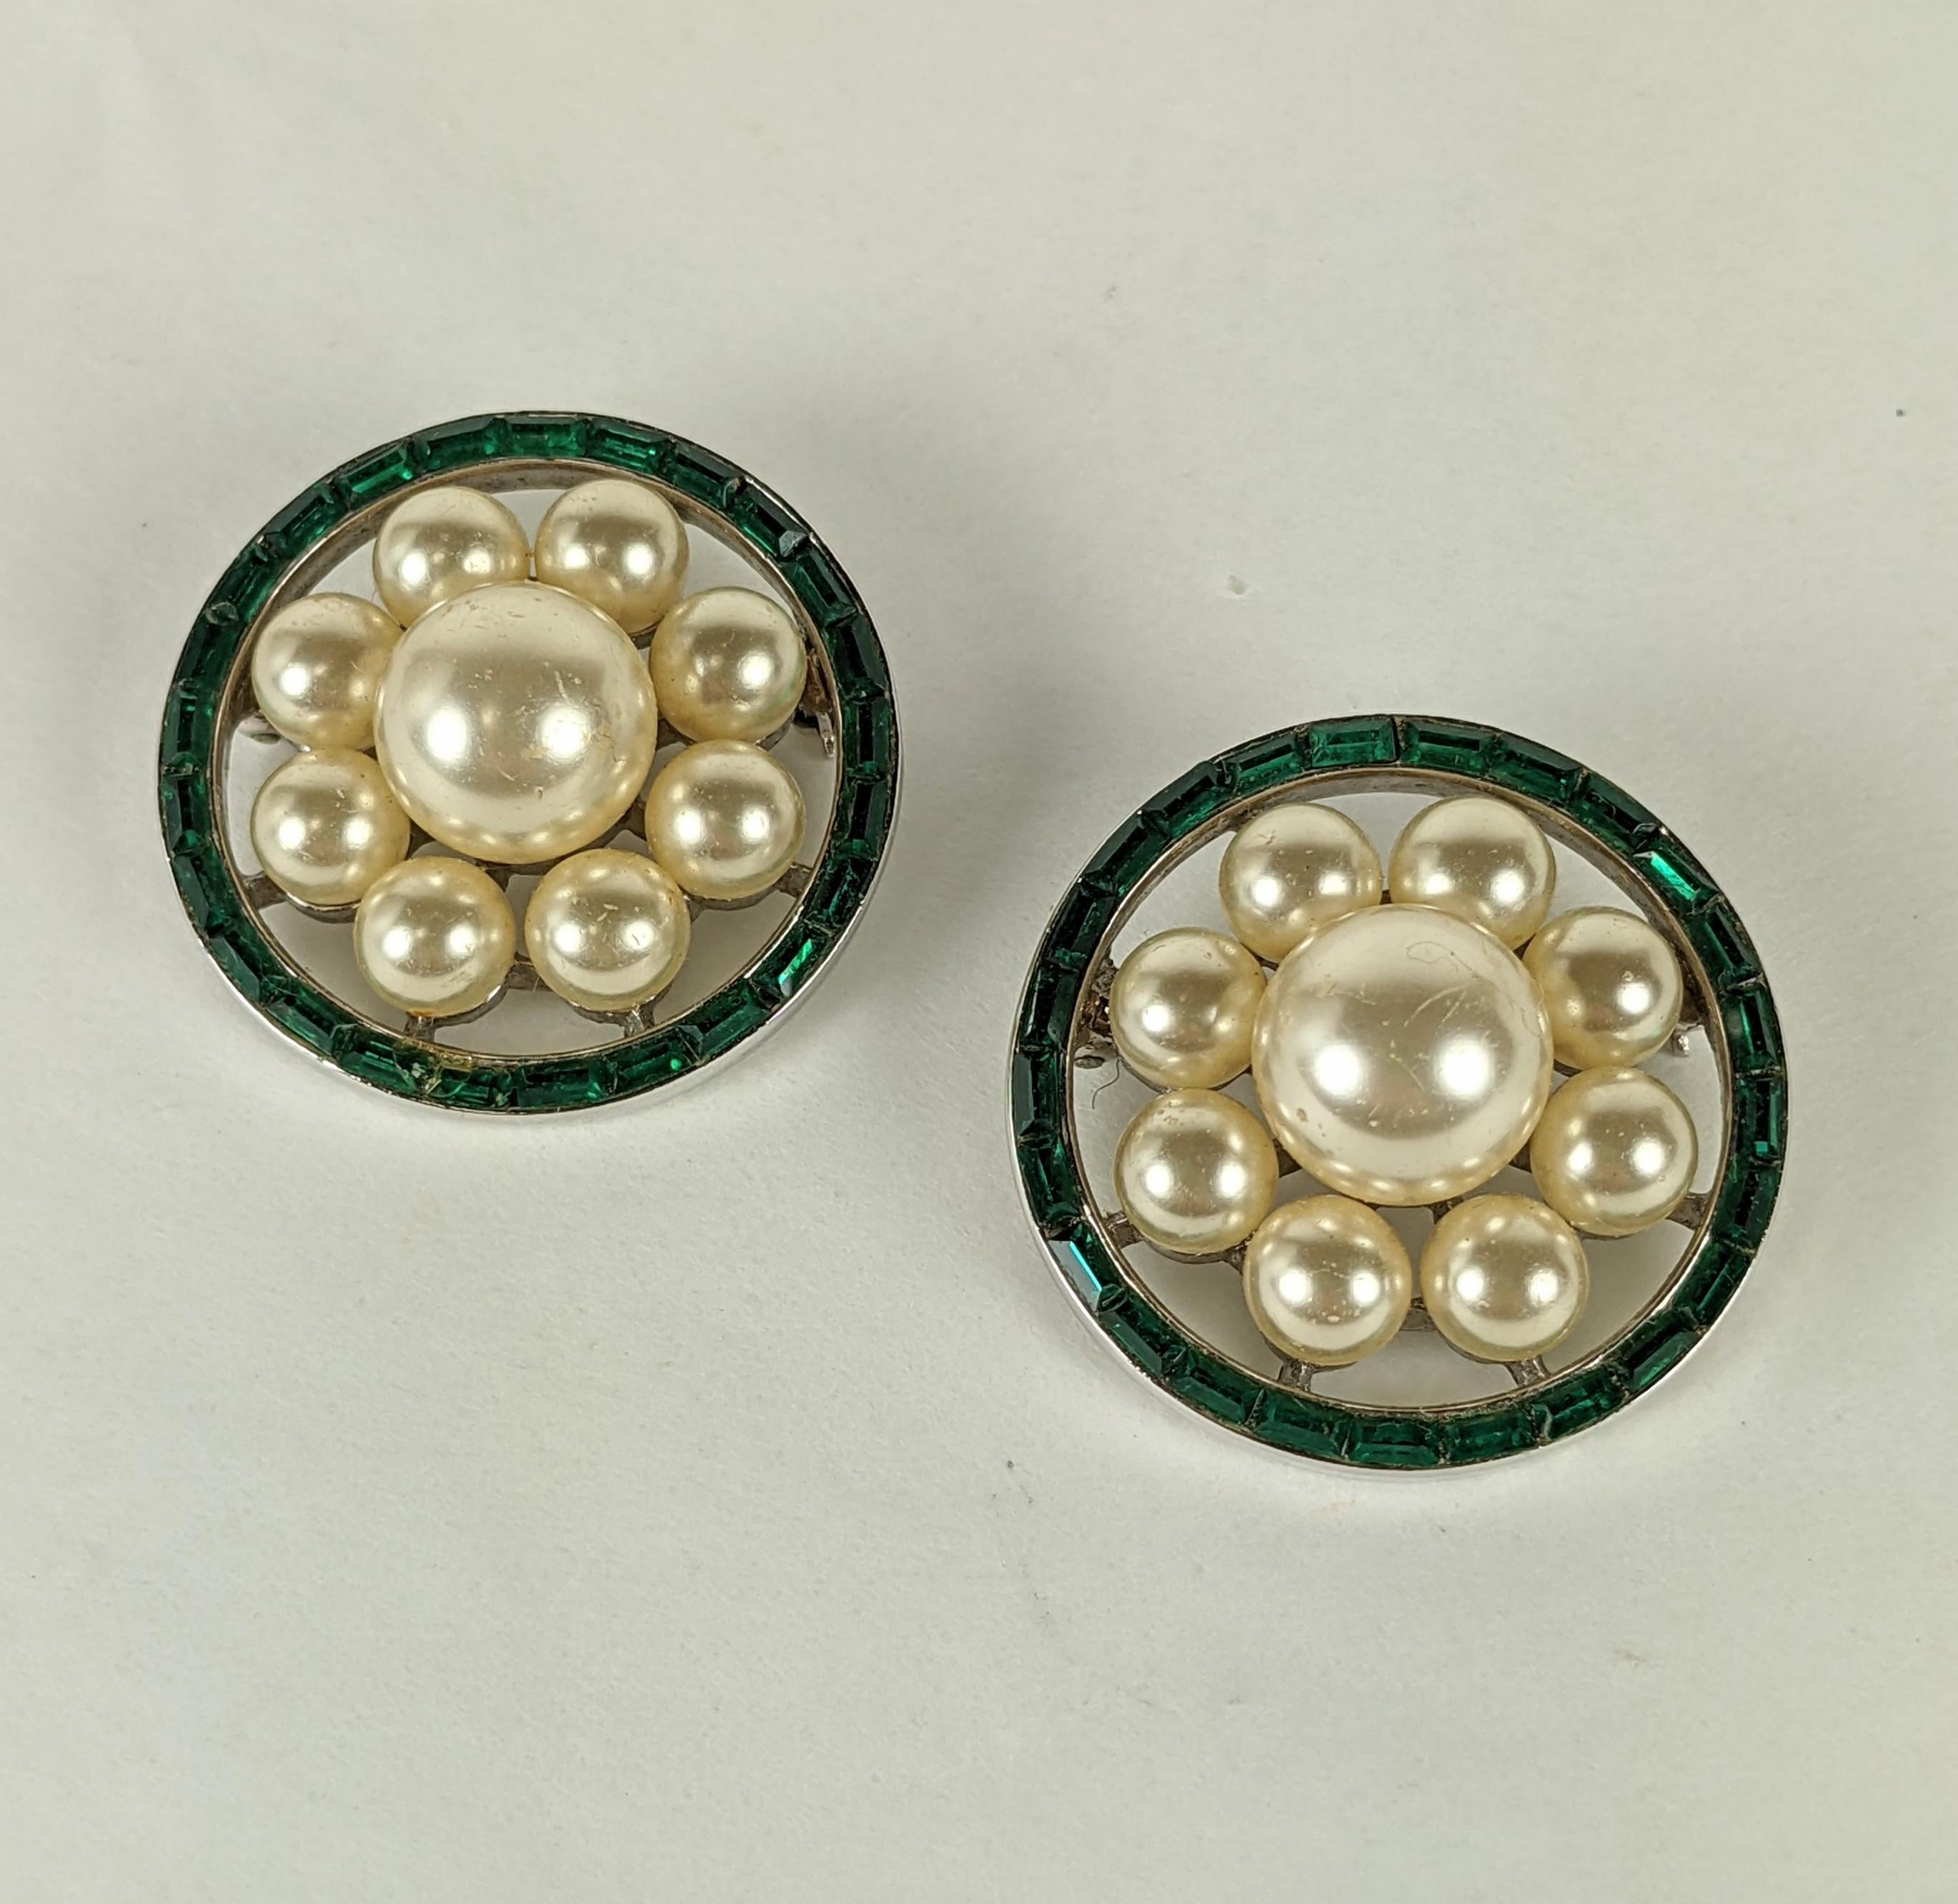 Fun pair of Trifari Pearl and Baguette Scatter Pins from the 1960's of faux pearls with emerald baguette borders. Signed Trifari,  1